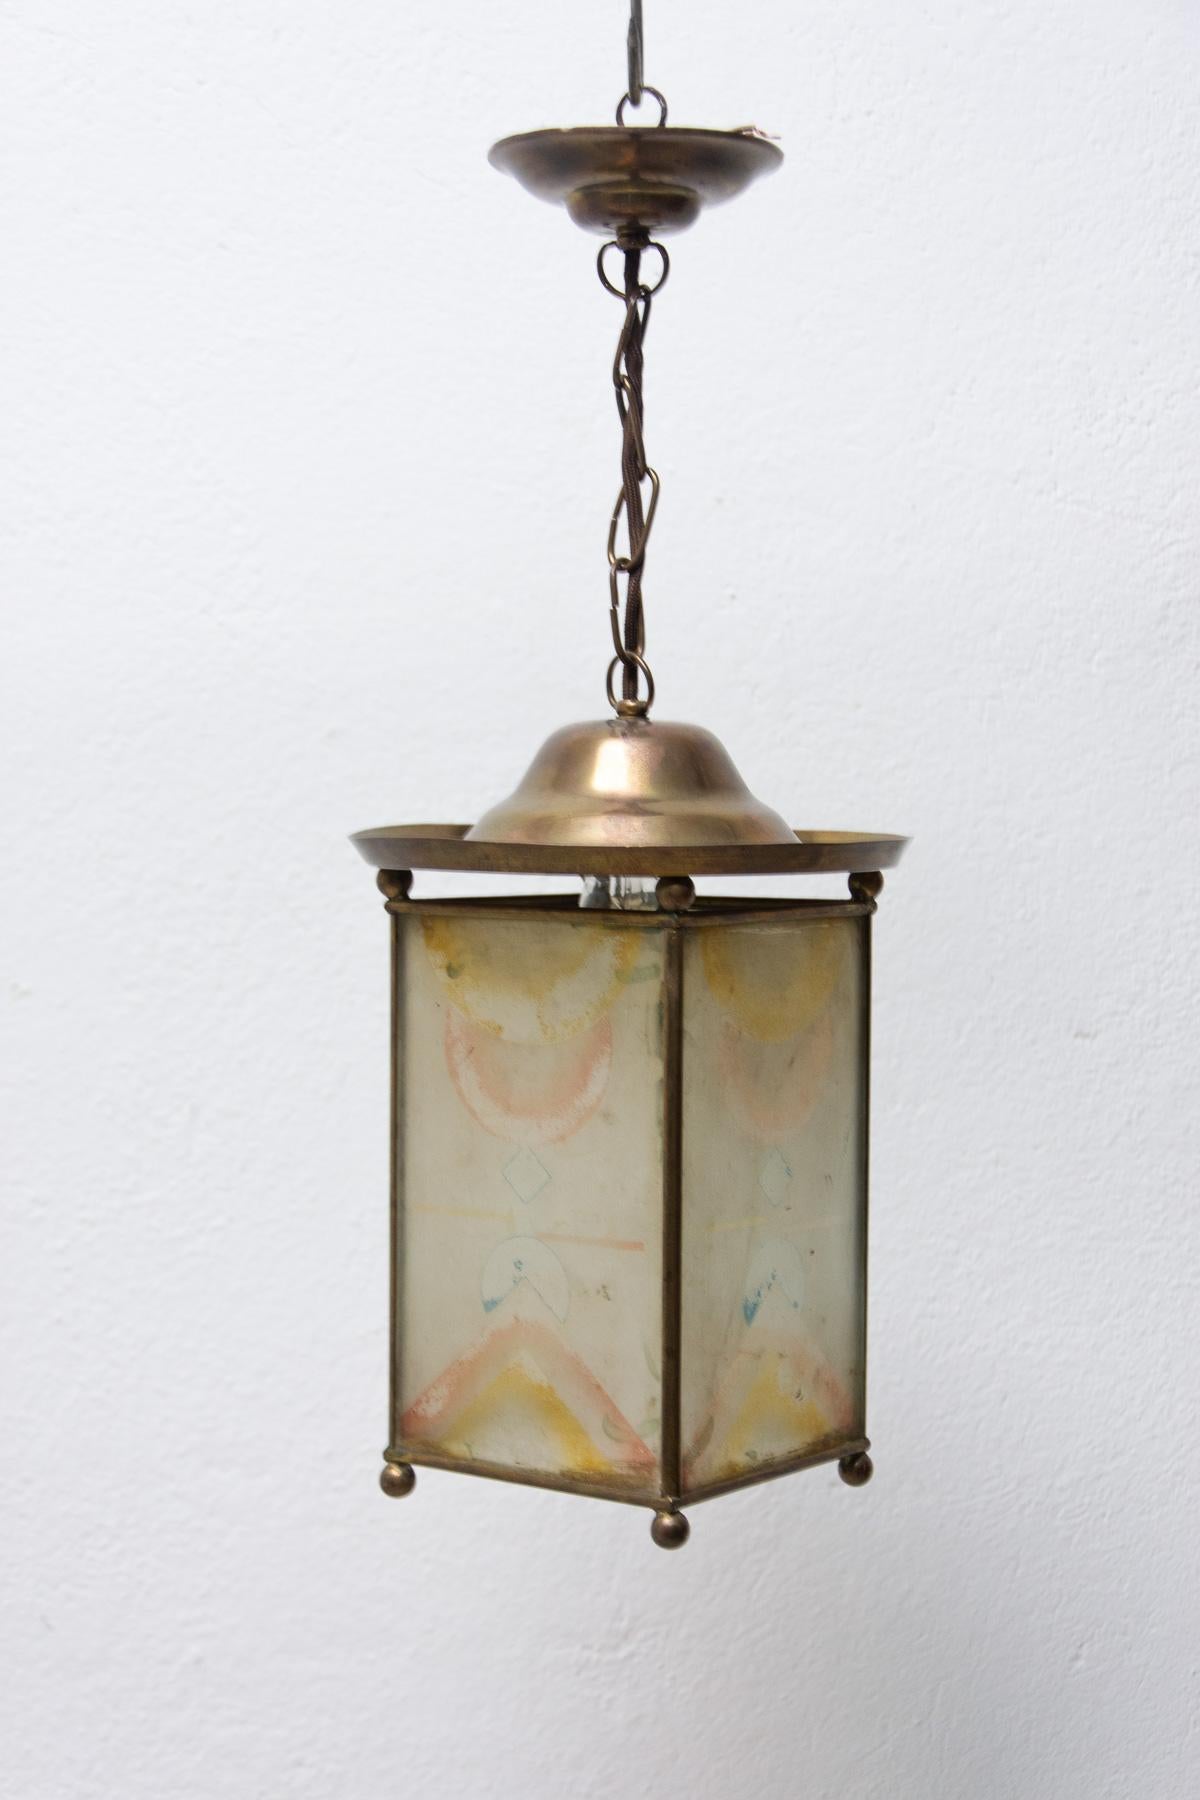 Secession hanging lantern, made around 1915.
“Provenance” Austria
Material: brass, glass
Original decorative art nouveau motifs on the glass (slightly faded over the years)
The lamp is fully functional.
Works on one E27 bulb
Up to 250